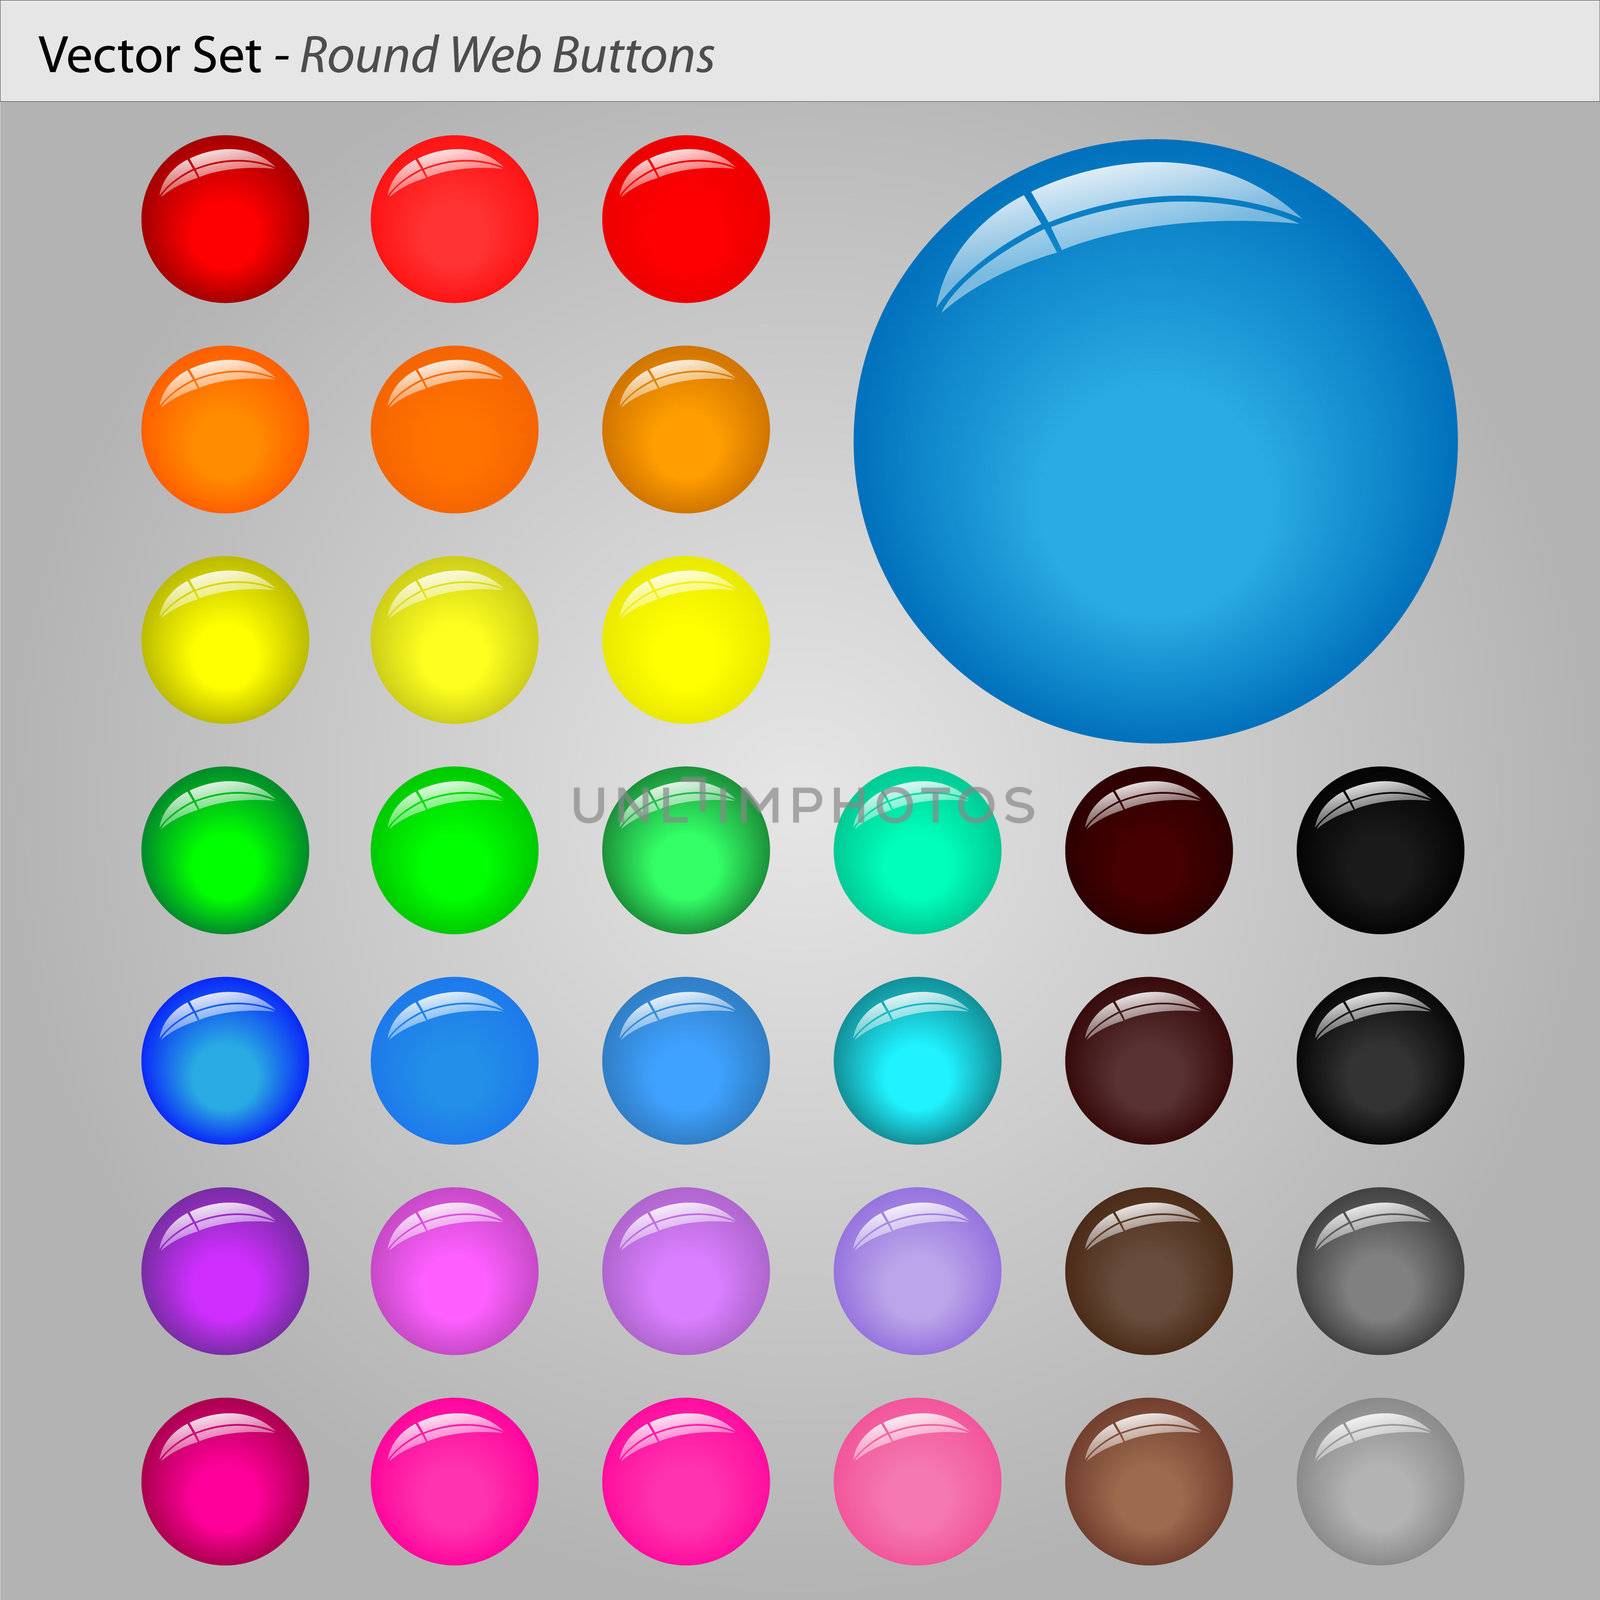 Image of various round web buttons.